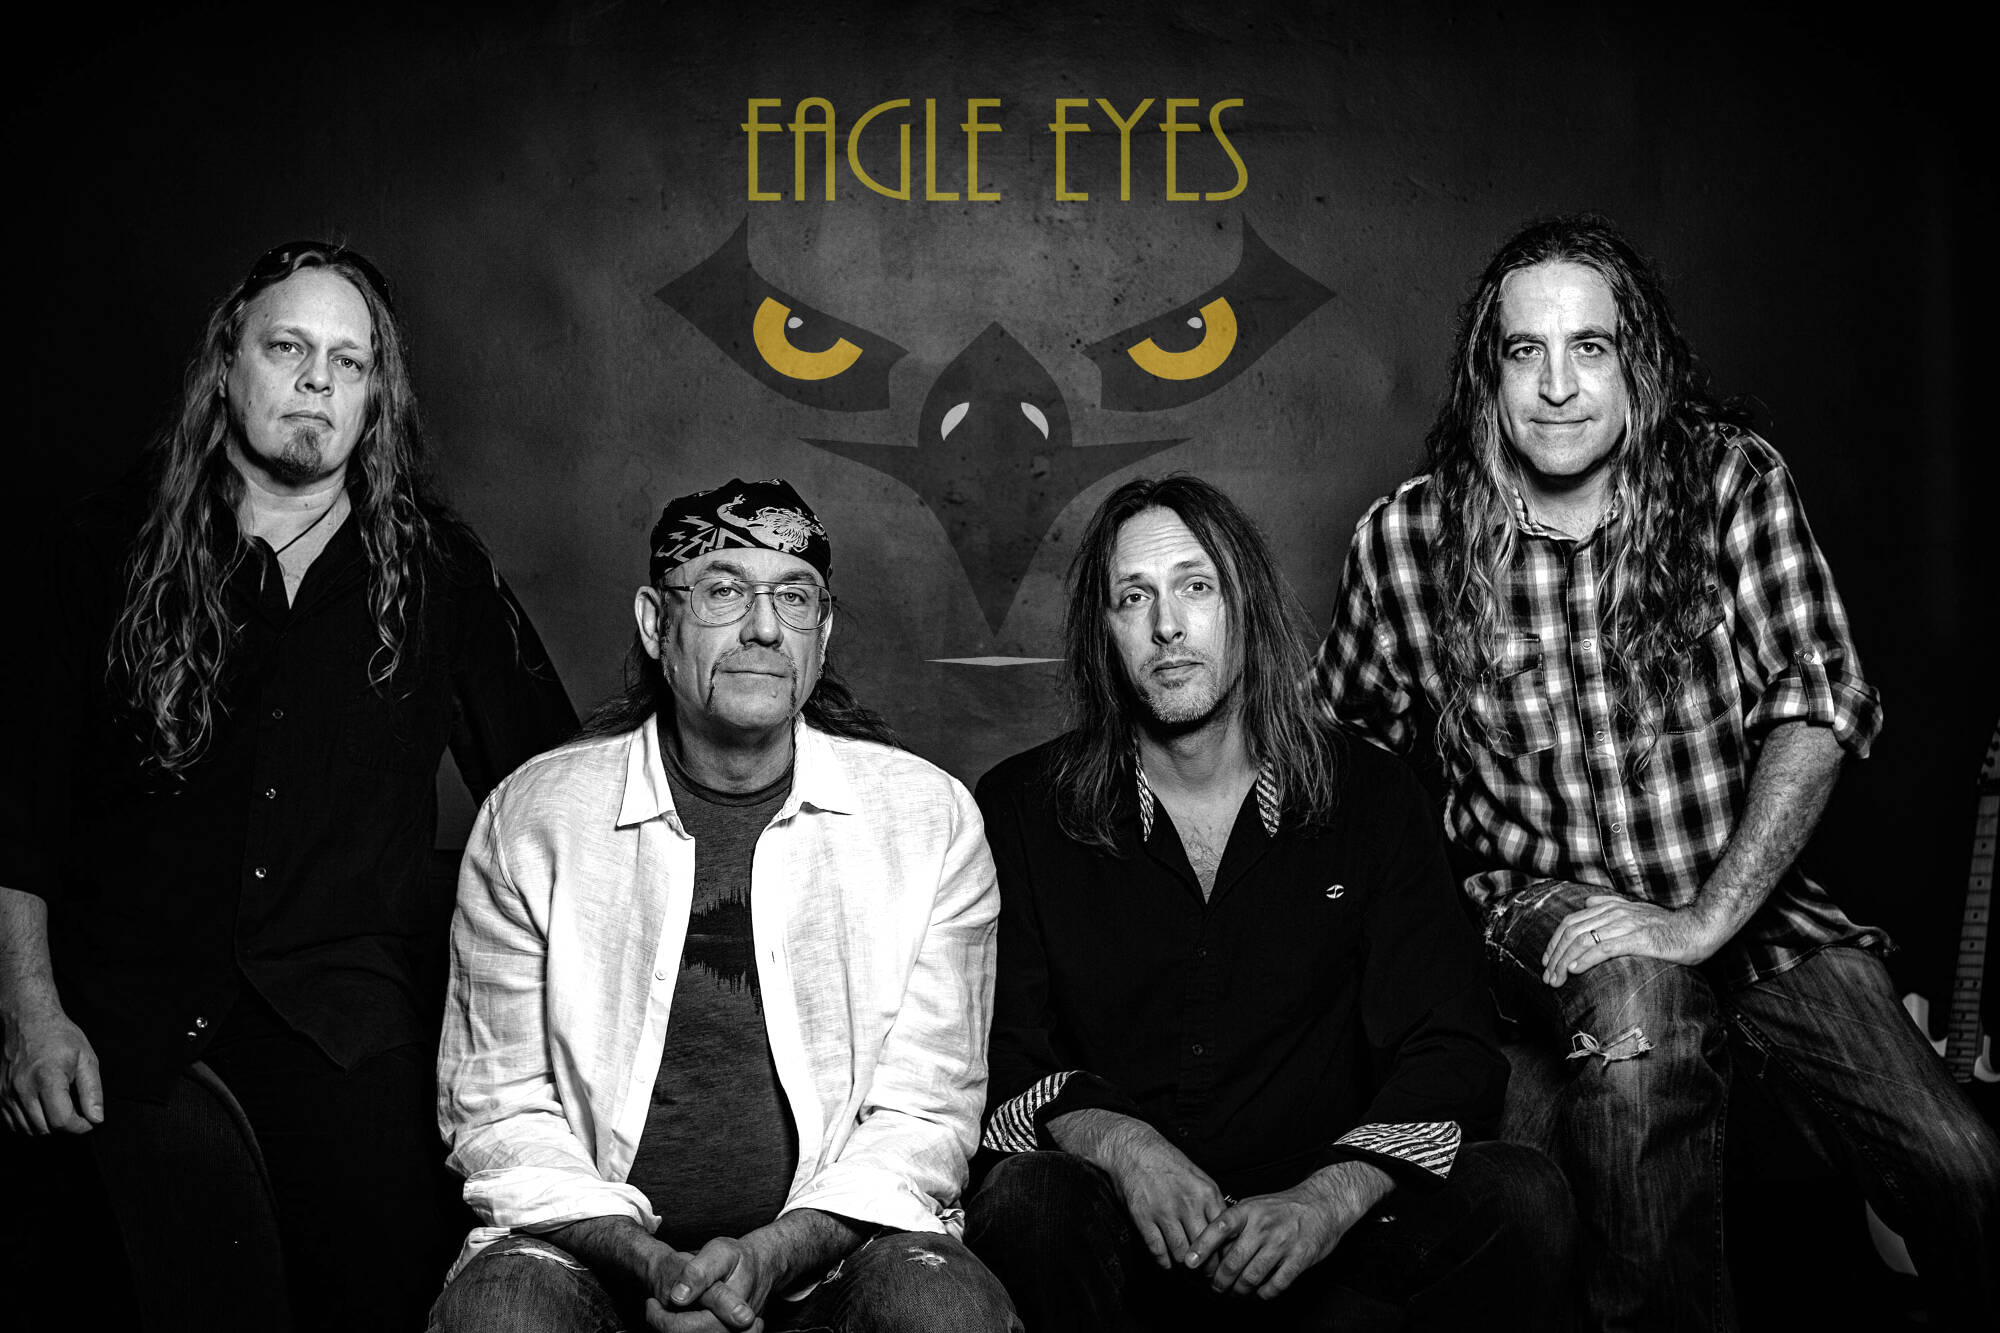 Eagle Eyes will be back at PeachFest Aug. 11 after attracting a capacity crowd in 2022. (Submitted)